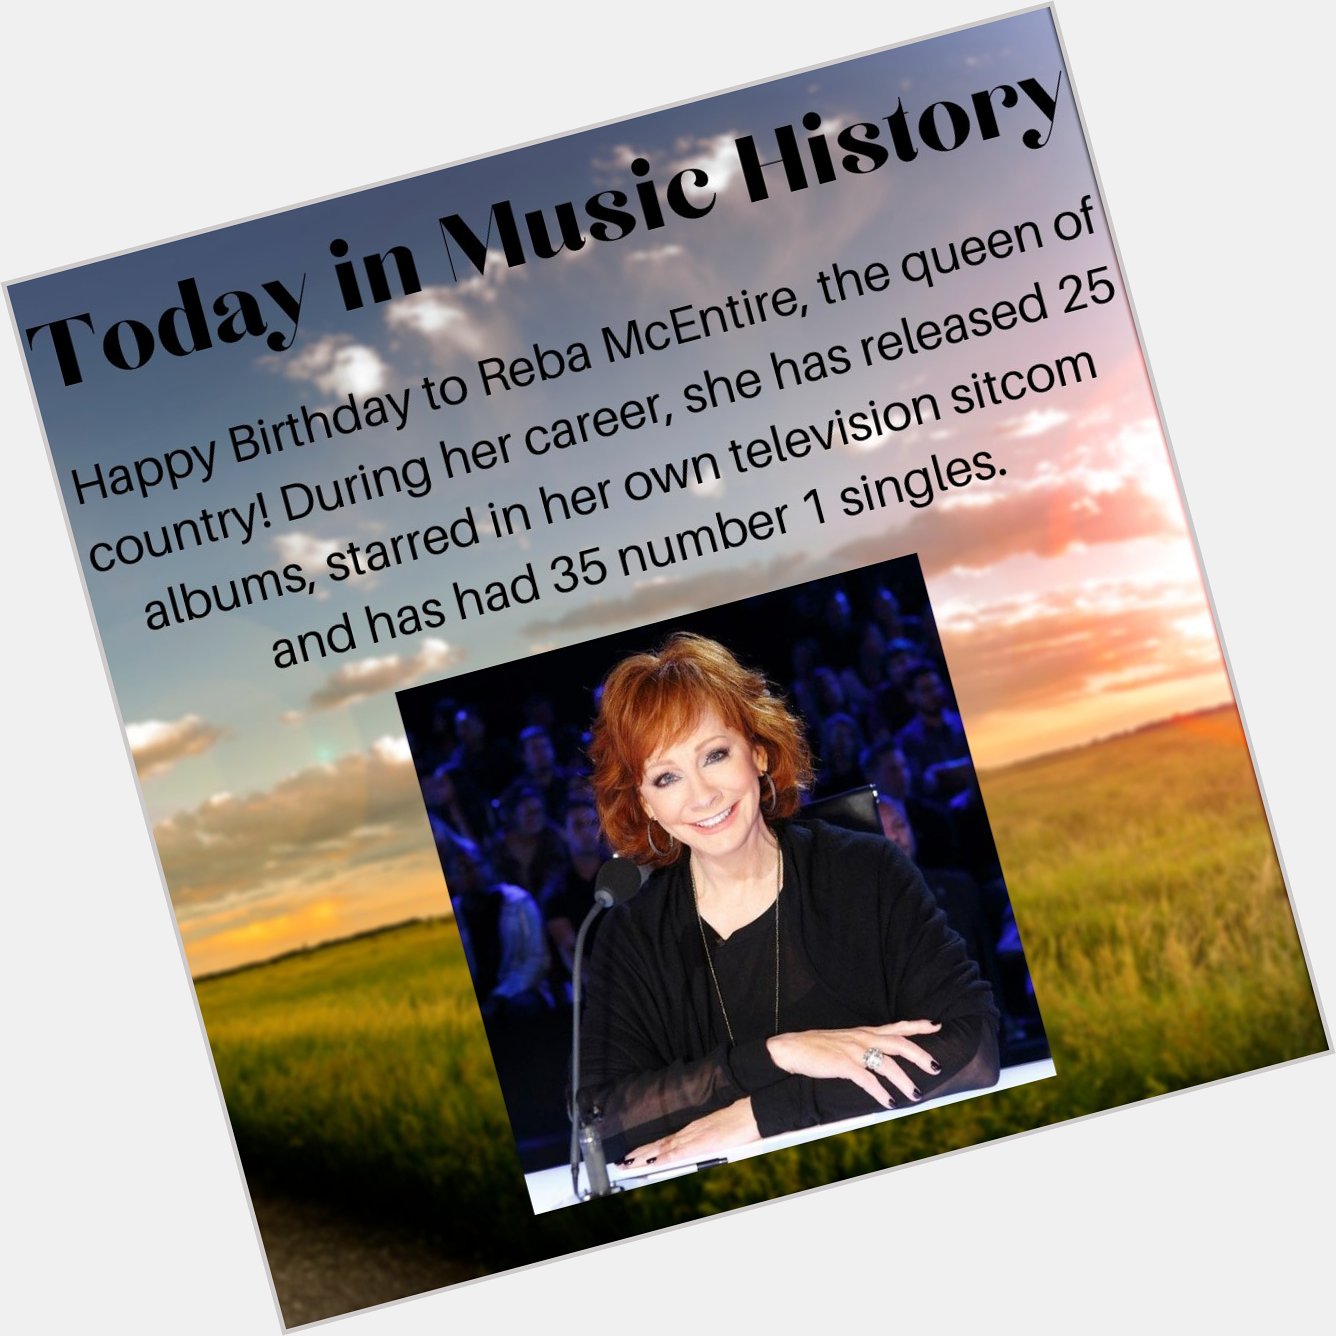 Today in music history we want to wish Happy Birthday to Reba McEntire! 